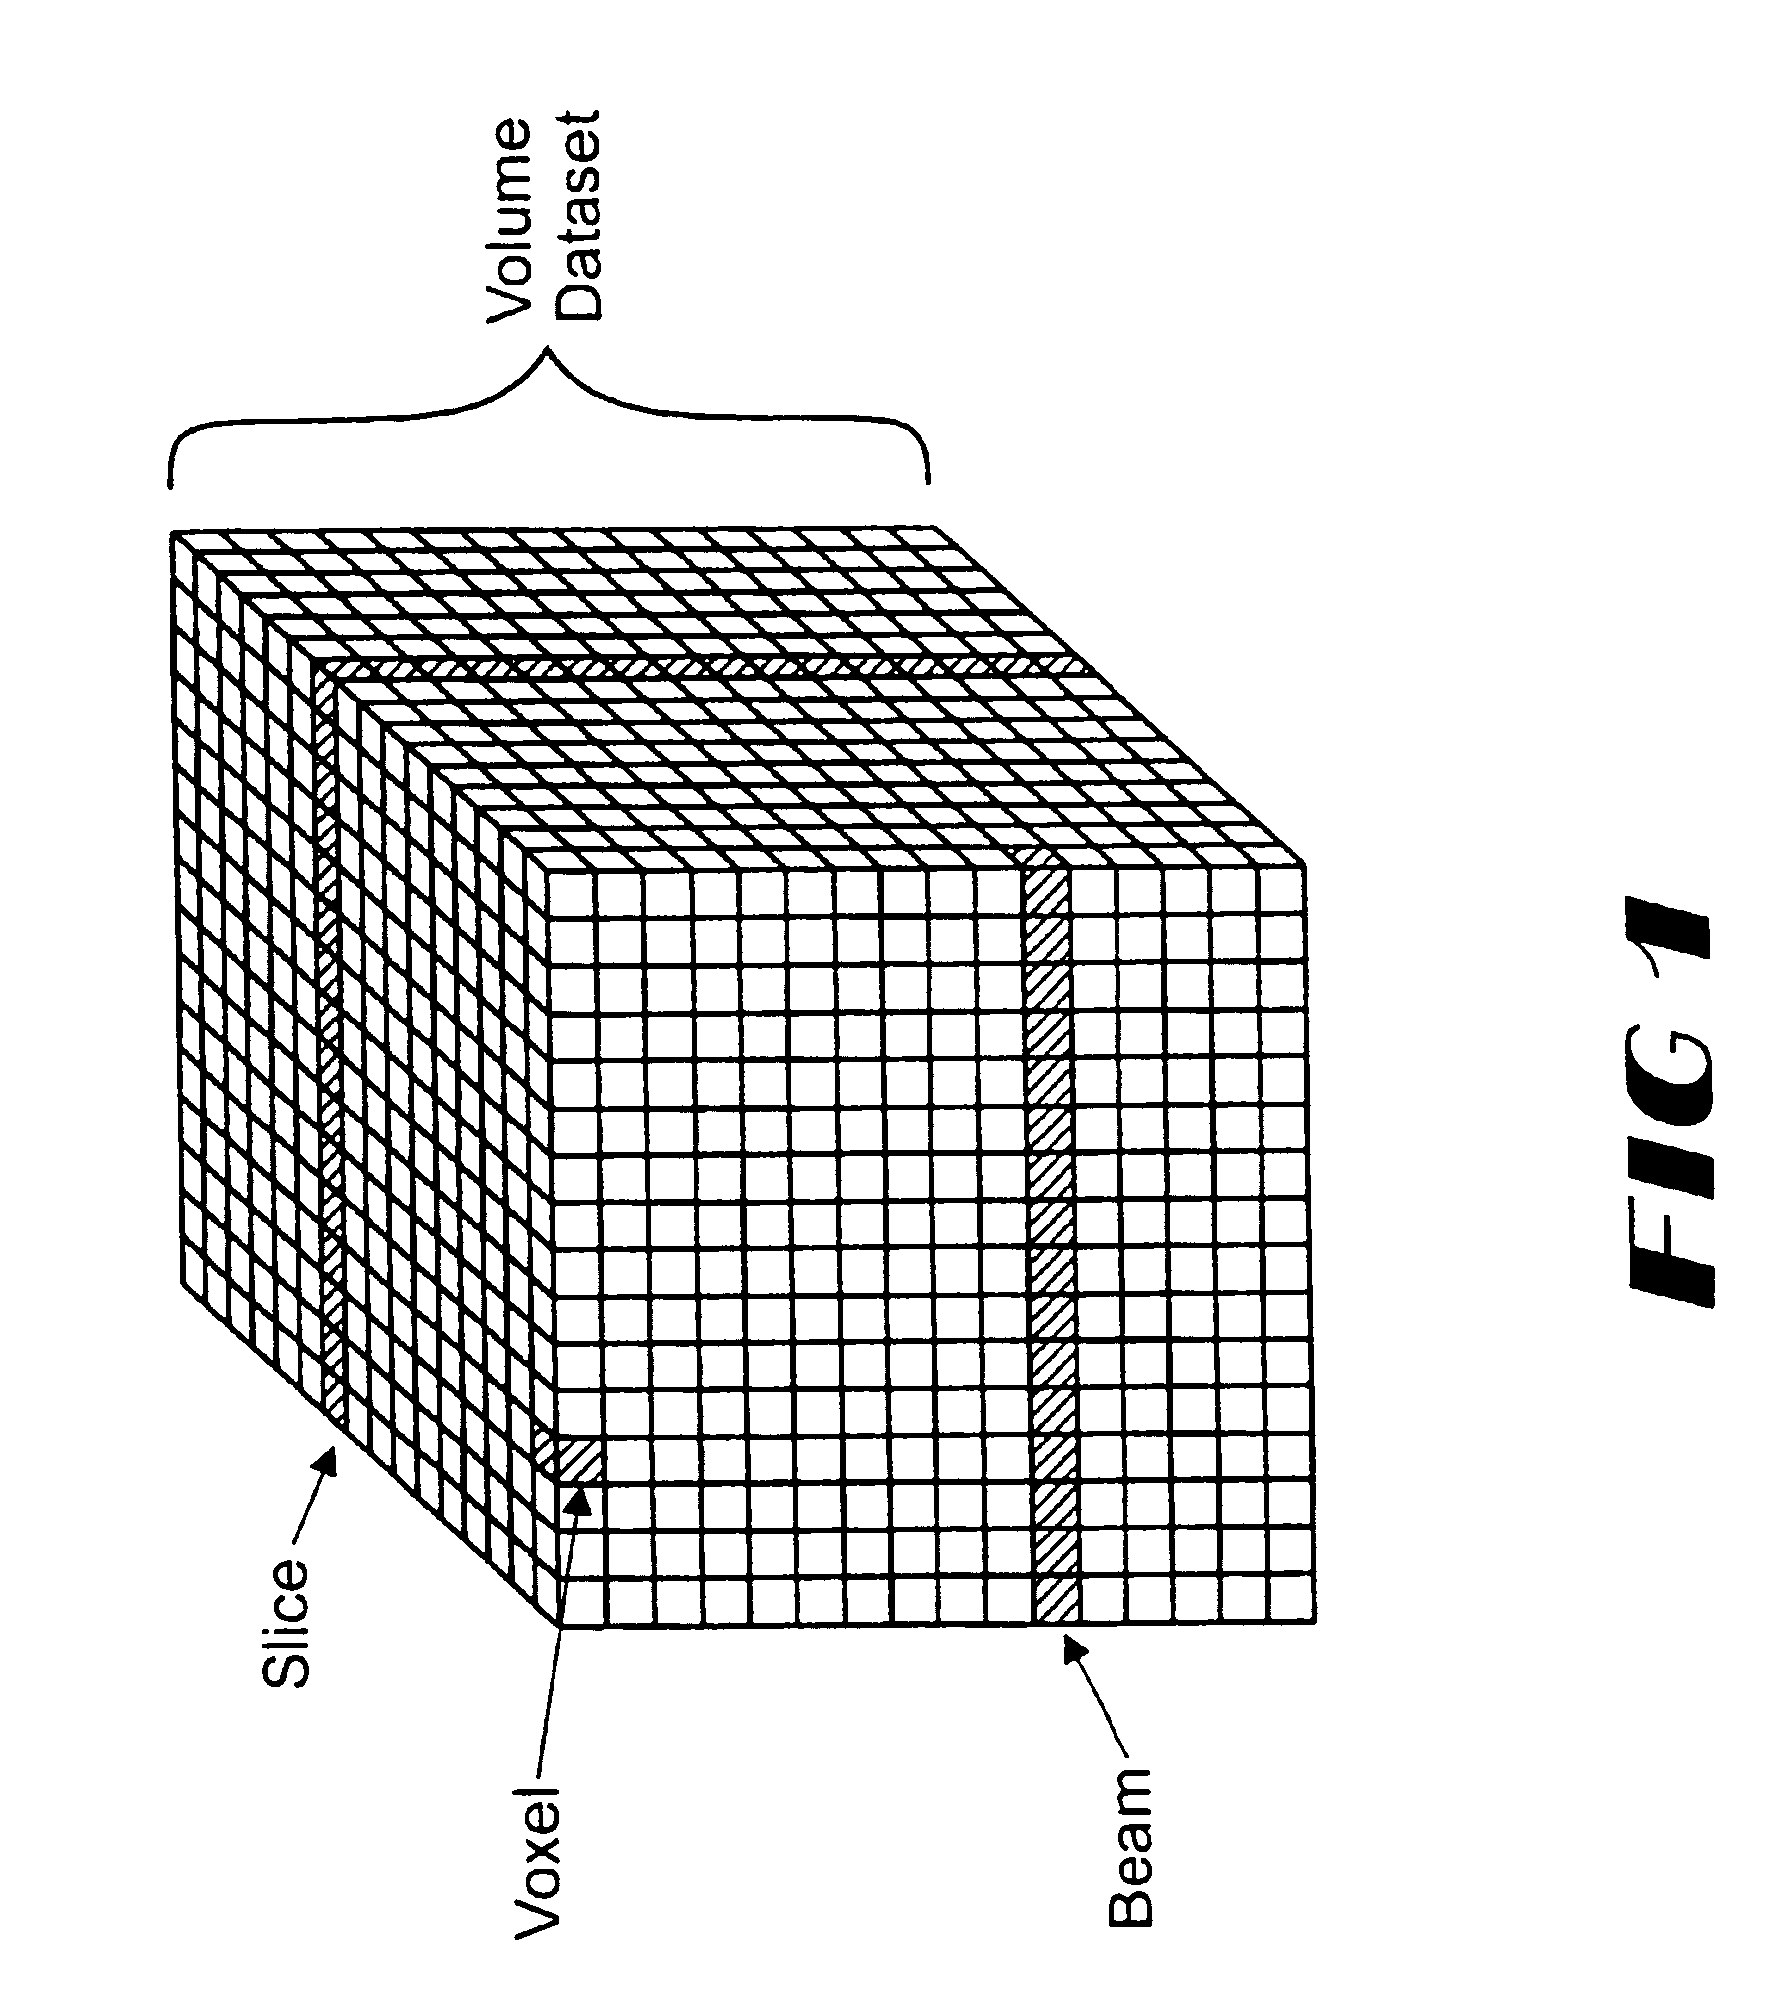 Resample and composite engine for real-time volume rendering